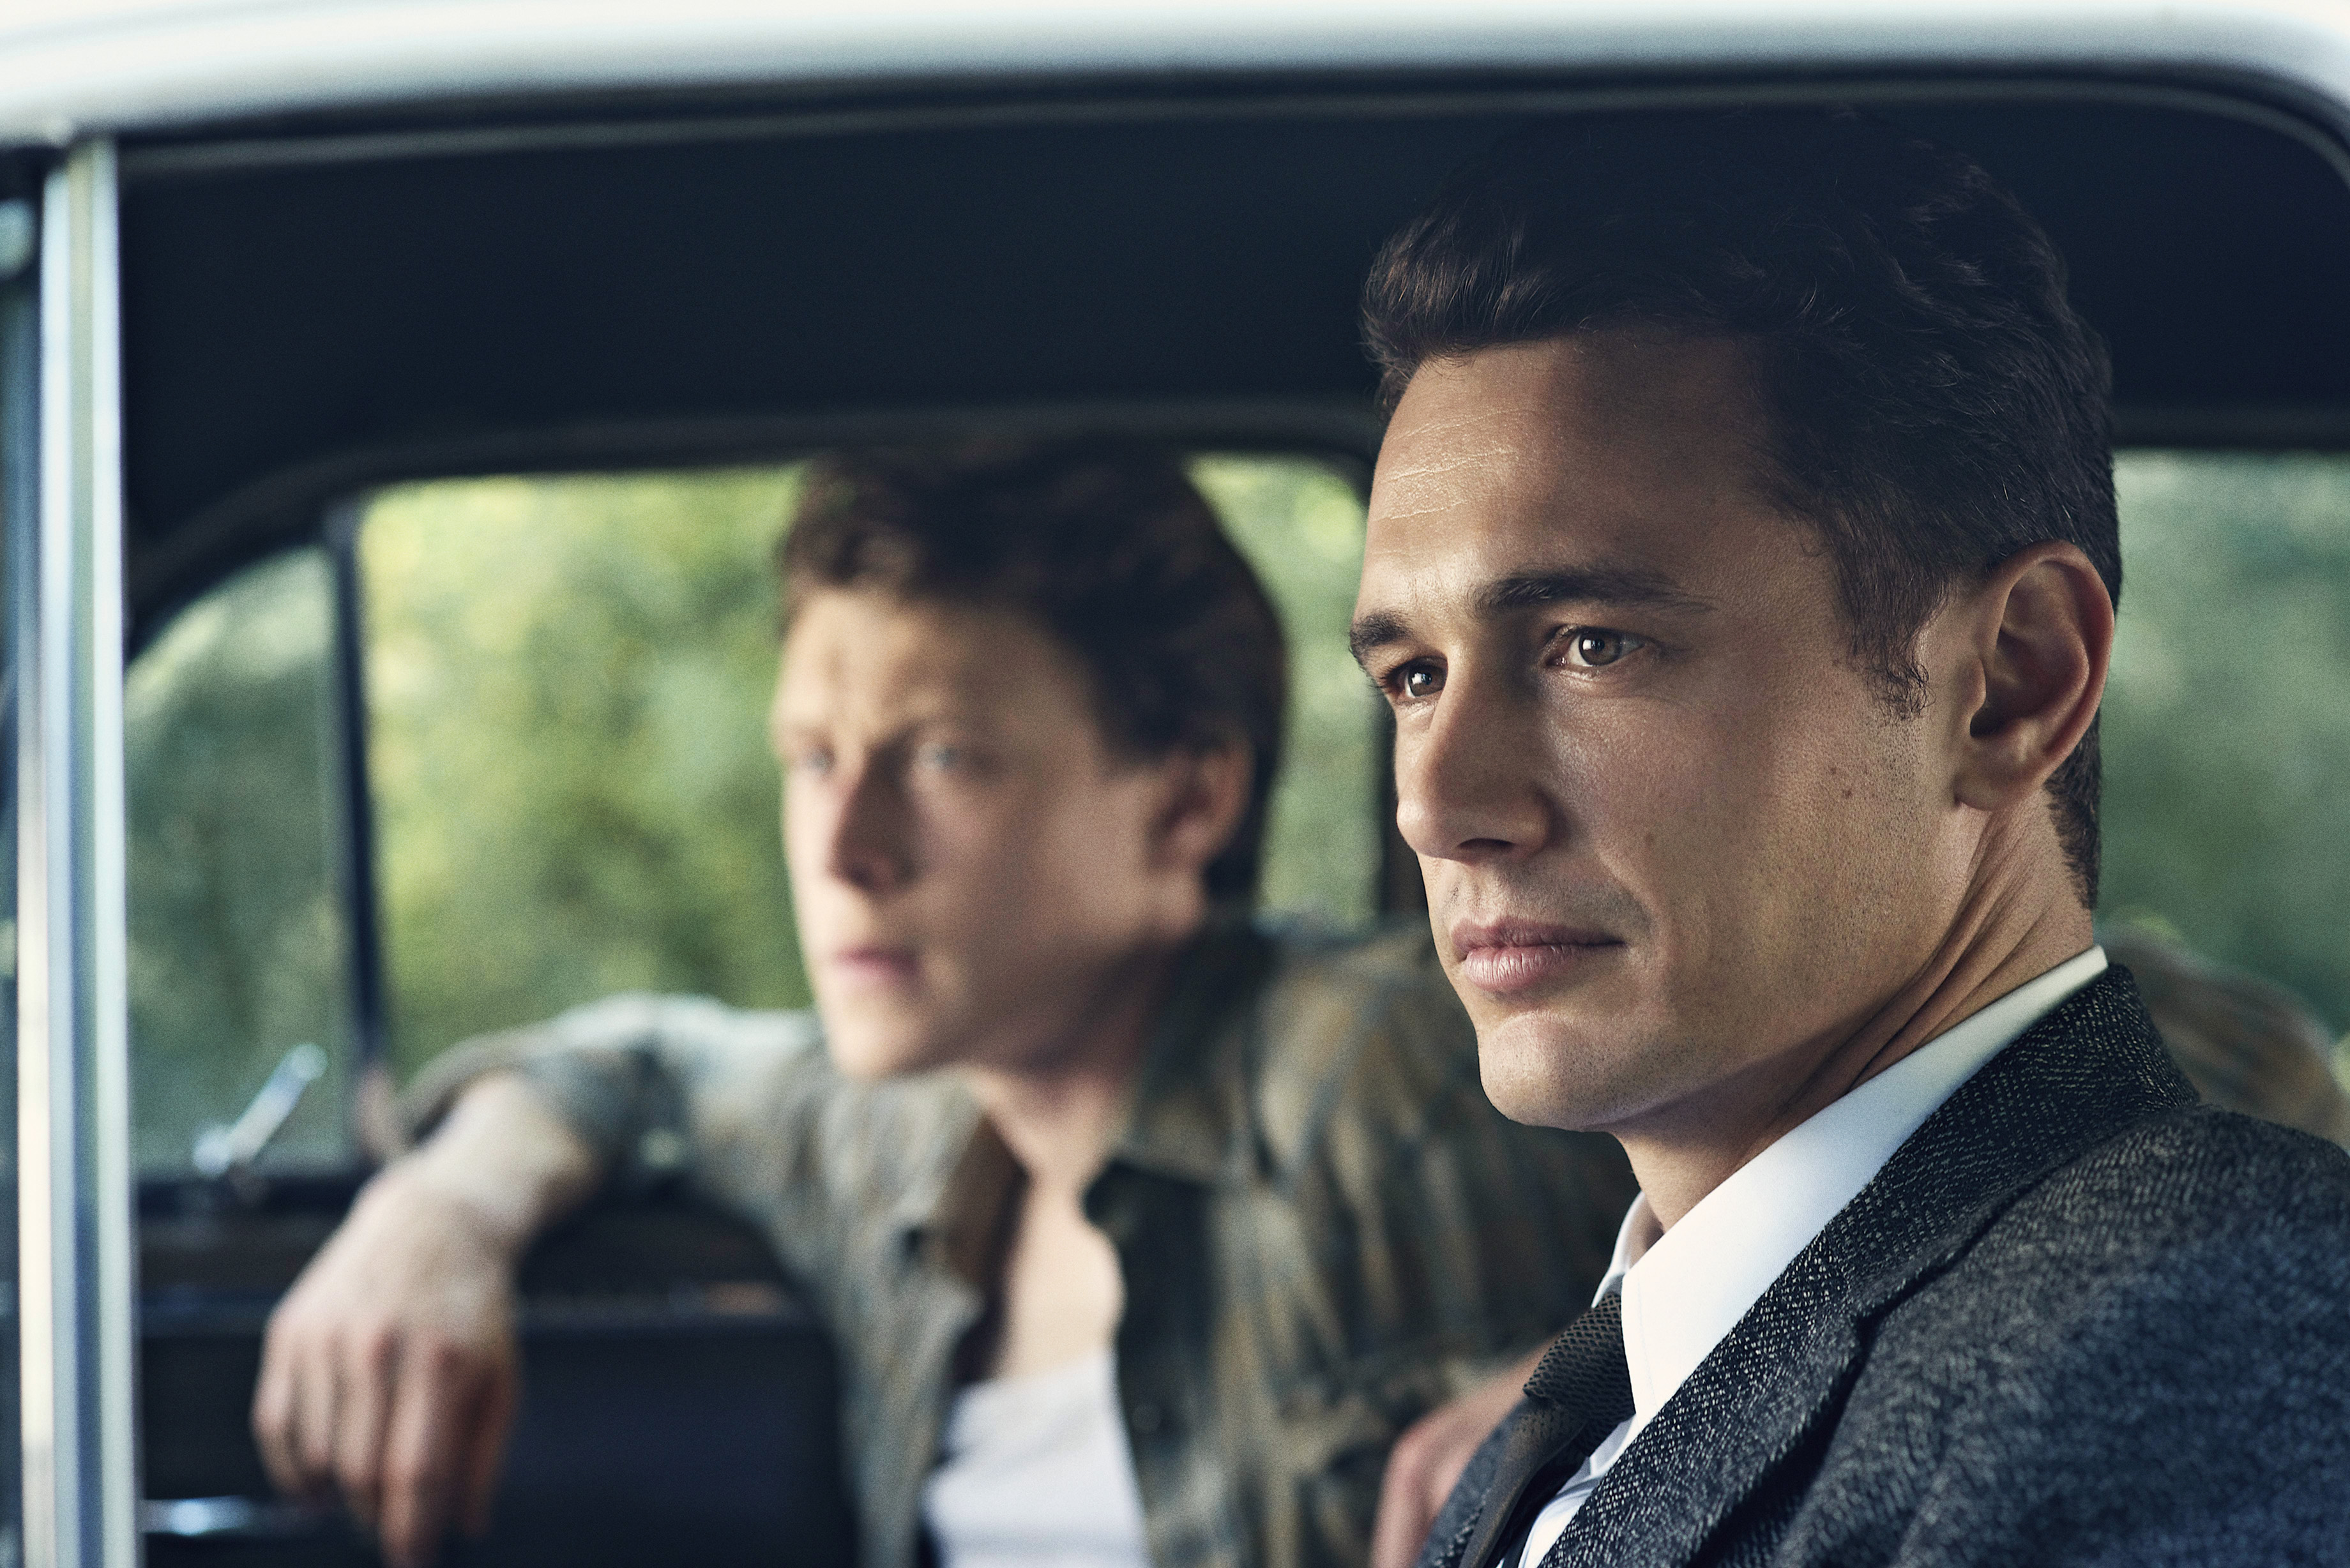 No trespassers in new teaser for Hulu’s ‘11.22.63’